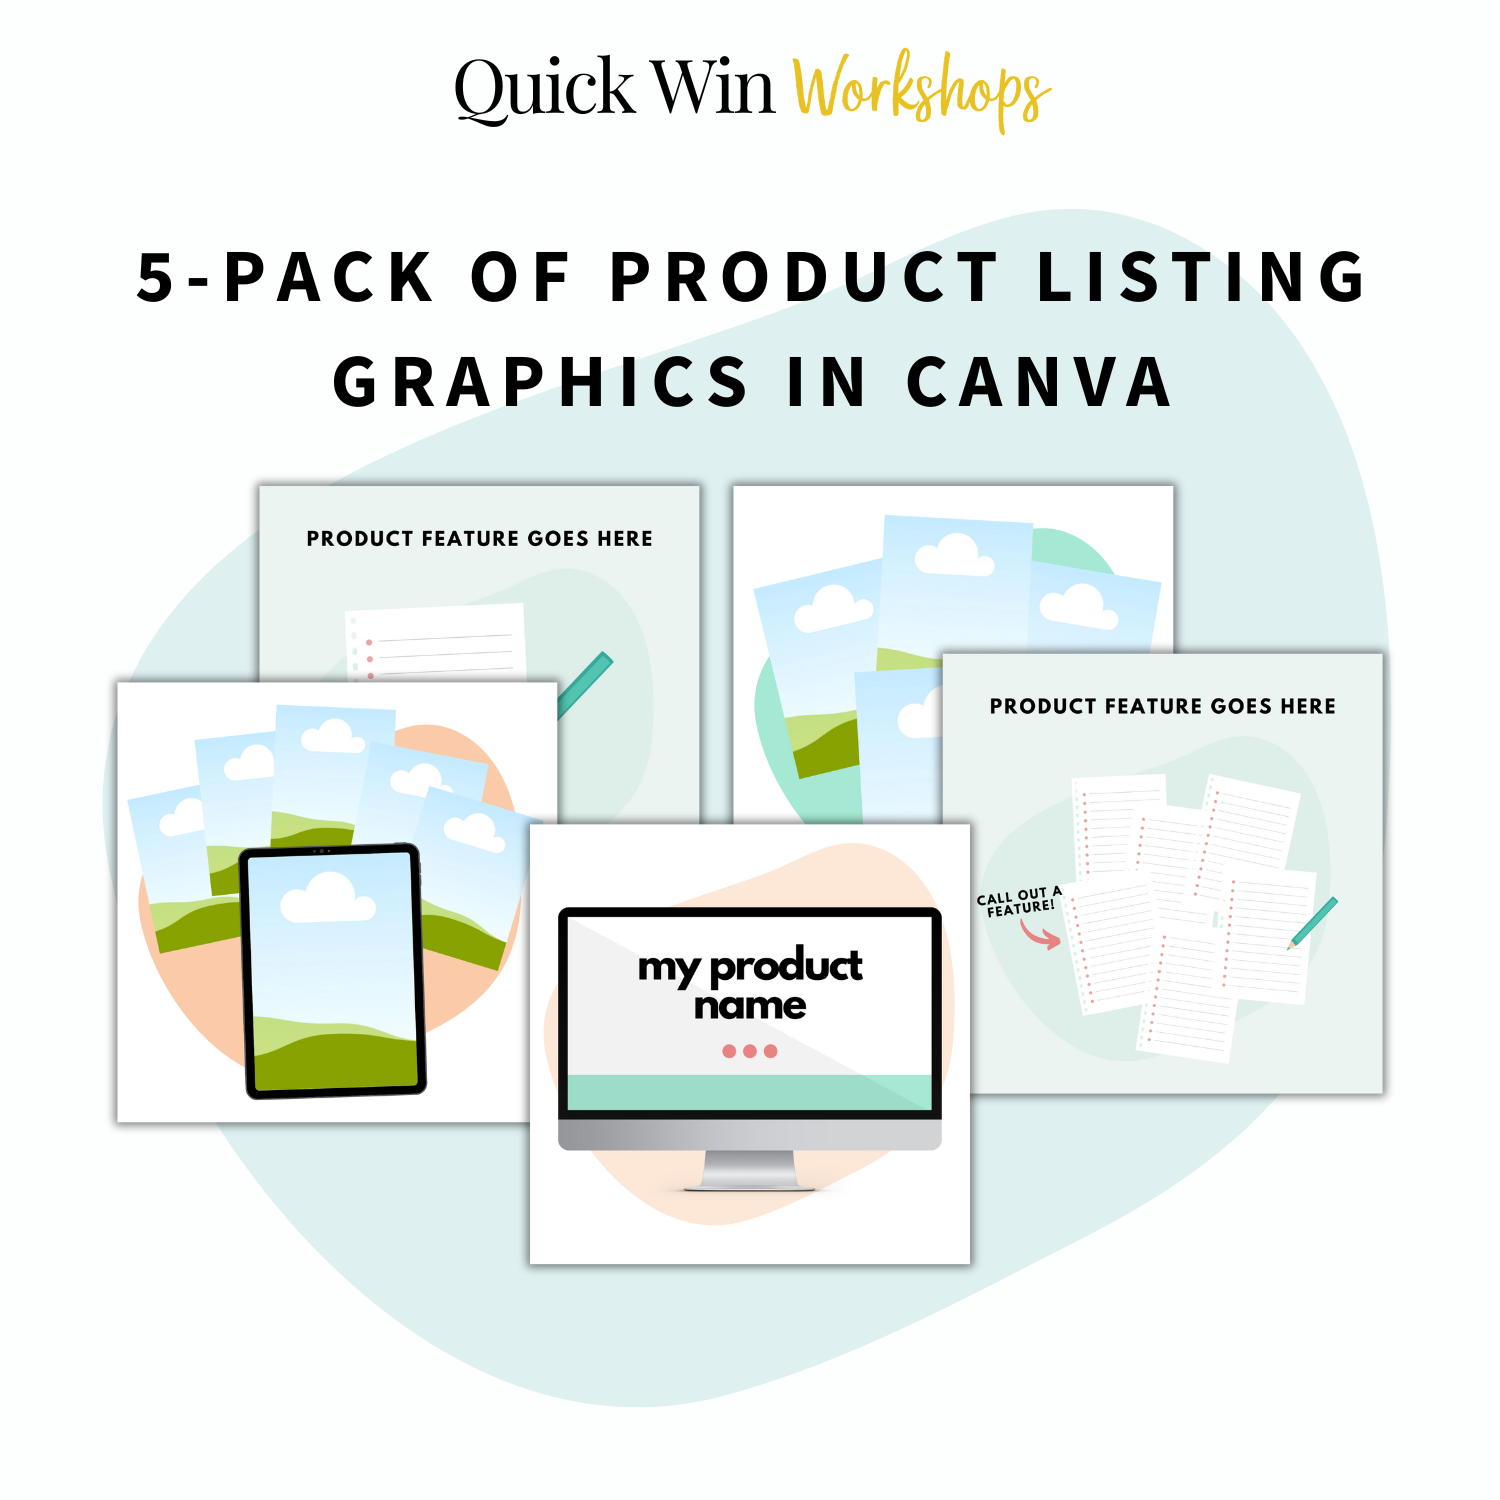 What's included in Quick Win Workshop: How to Strategically Sell Digital Products with Shopify - 5 Pack of Product Listing Graphics in Canva